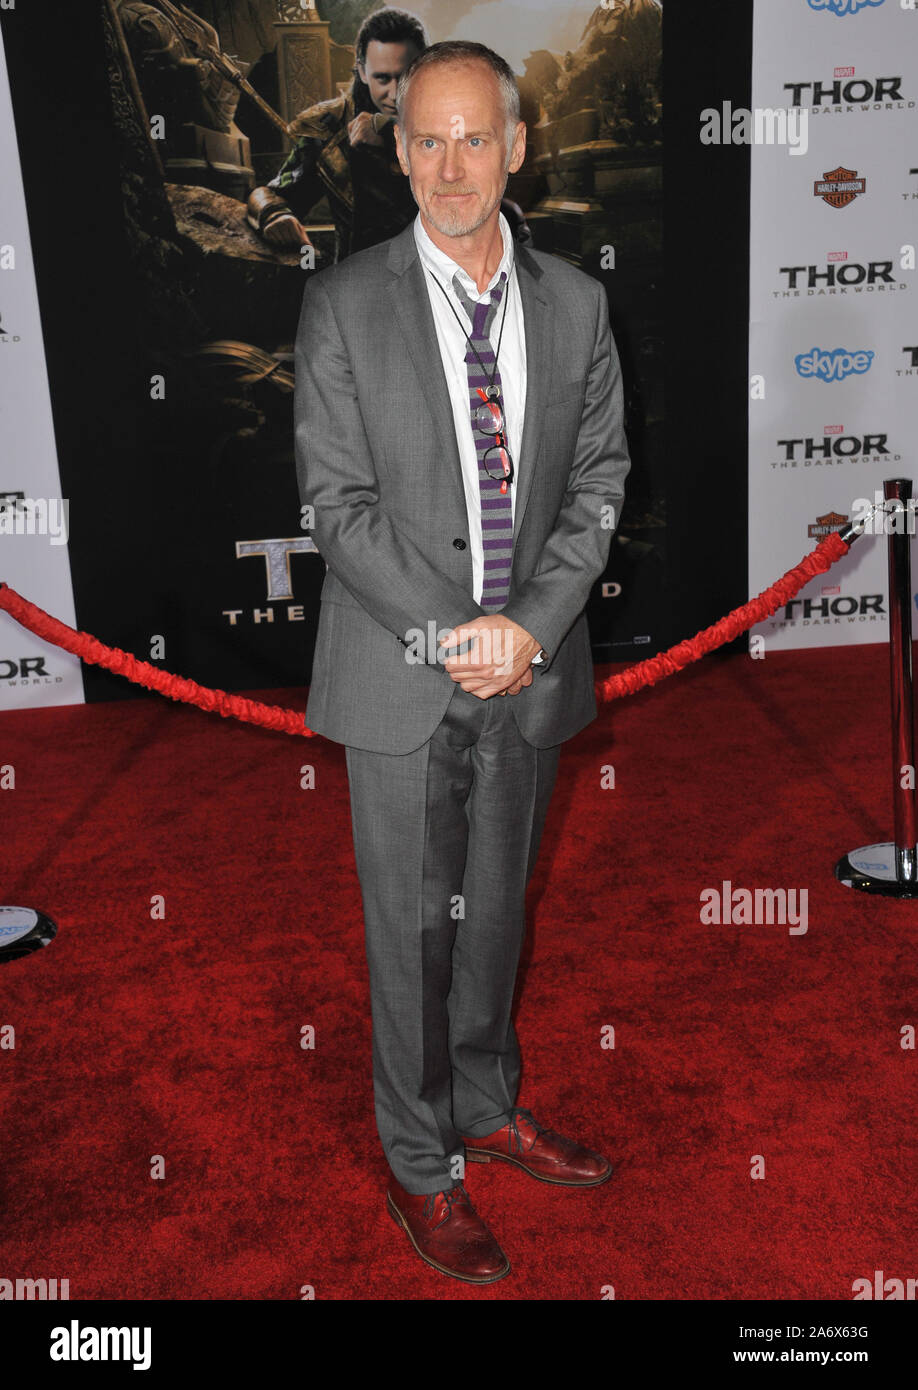 LOS ANGELES, CA - NOVEMBER 4, 2013: Director Alan Taylor at the US premiere of his movie 'Thor: The Dark World' at the El Capitan Theatre, Hollywood. Picture: Paul Smith / Featureflash Stock Photo